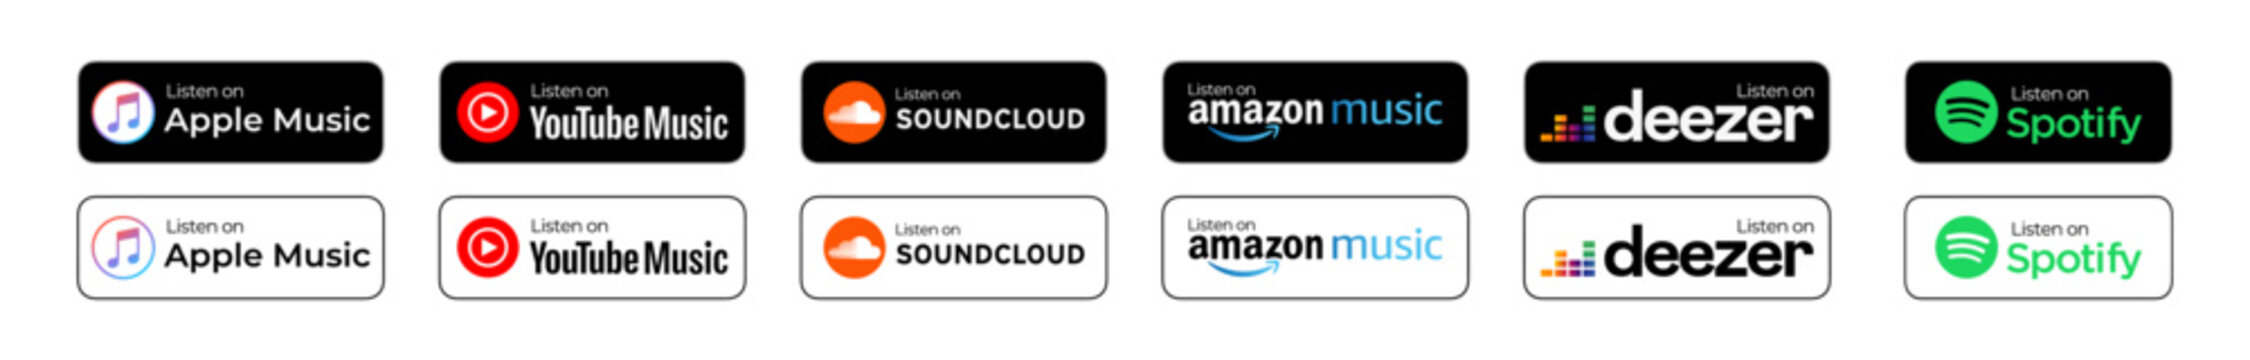 popular Music streaming services listen on badges set. Apple Music, Spotify, Youtube Music, and Soundcloud. Simple, vector, printed on paper. icon for website design, marketing, and mobile app.